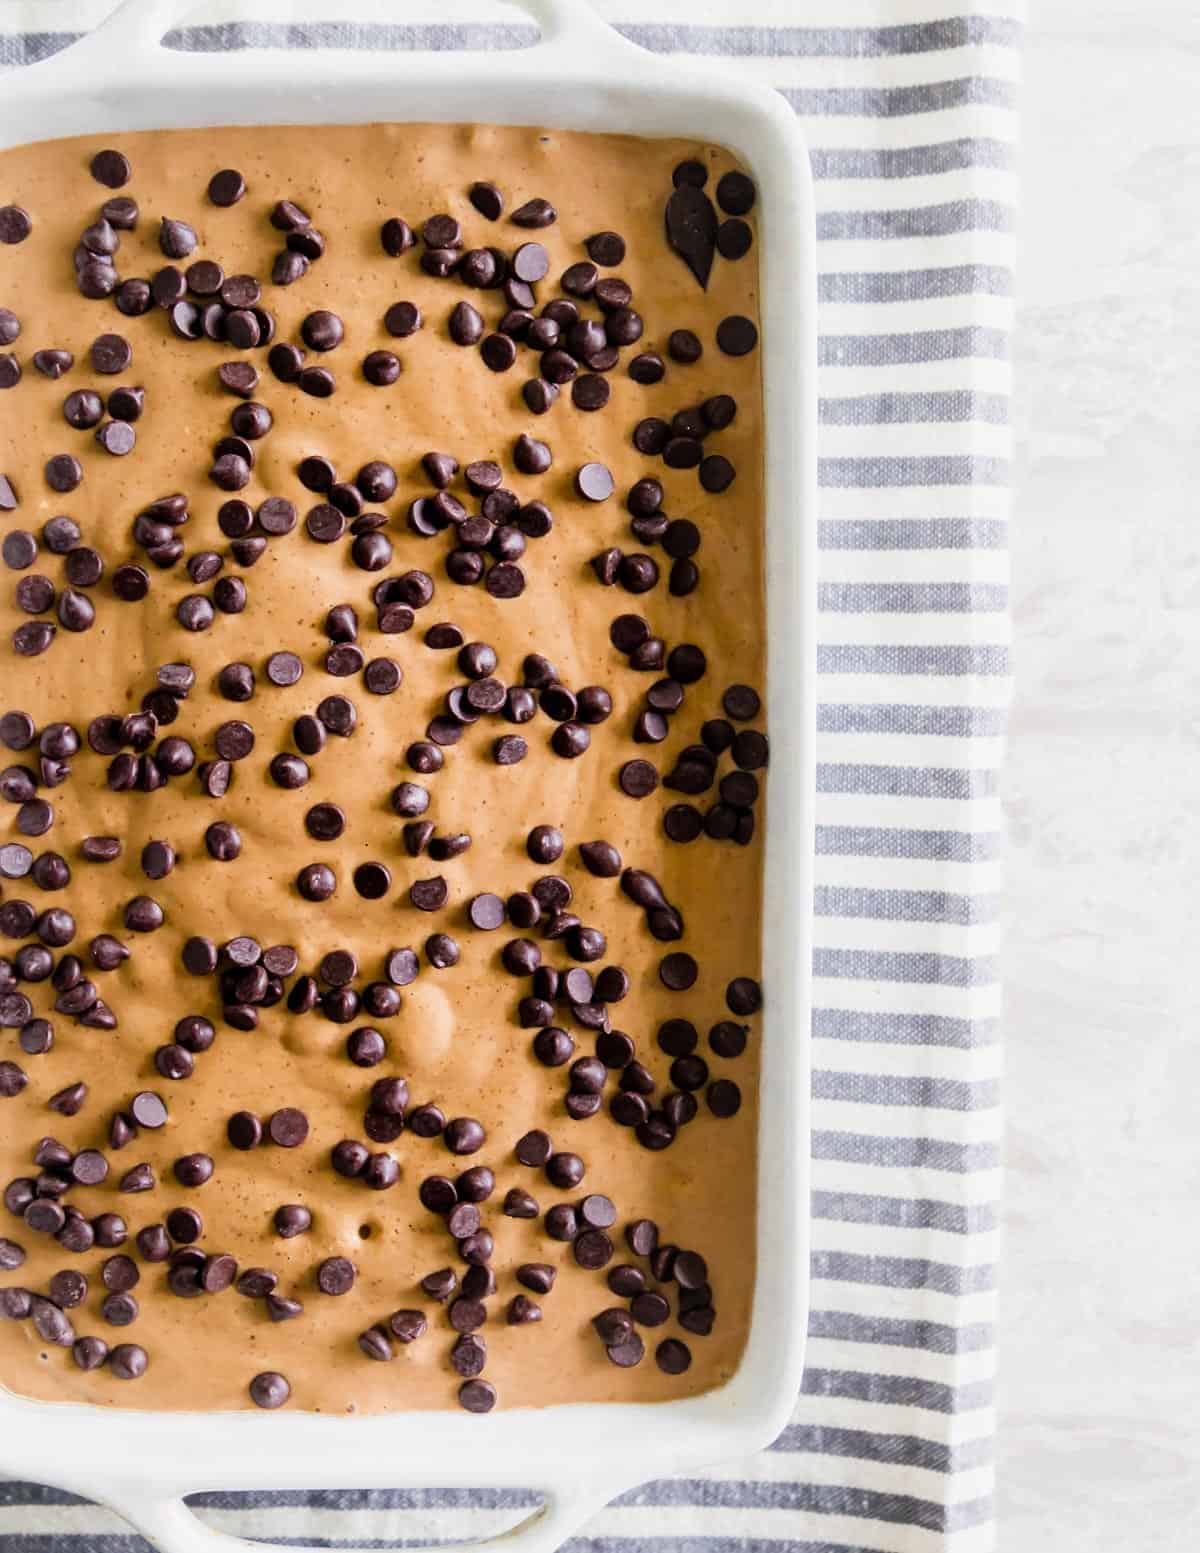 Blended ingredients for baked oats are poured into a baking dish and topped with chocolate chips before being baked in the oven.